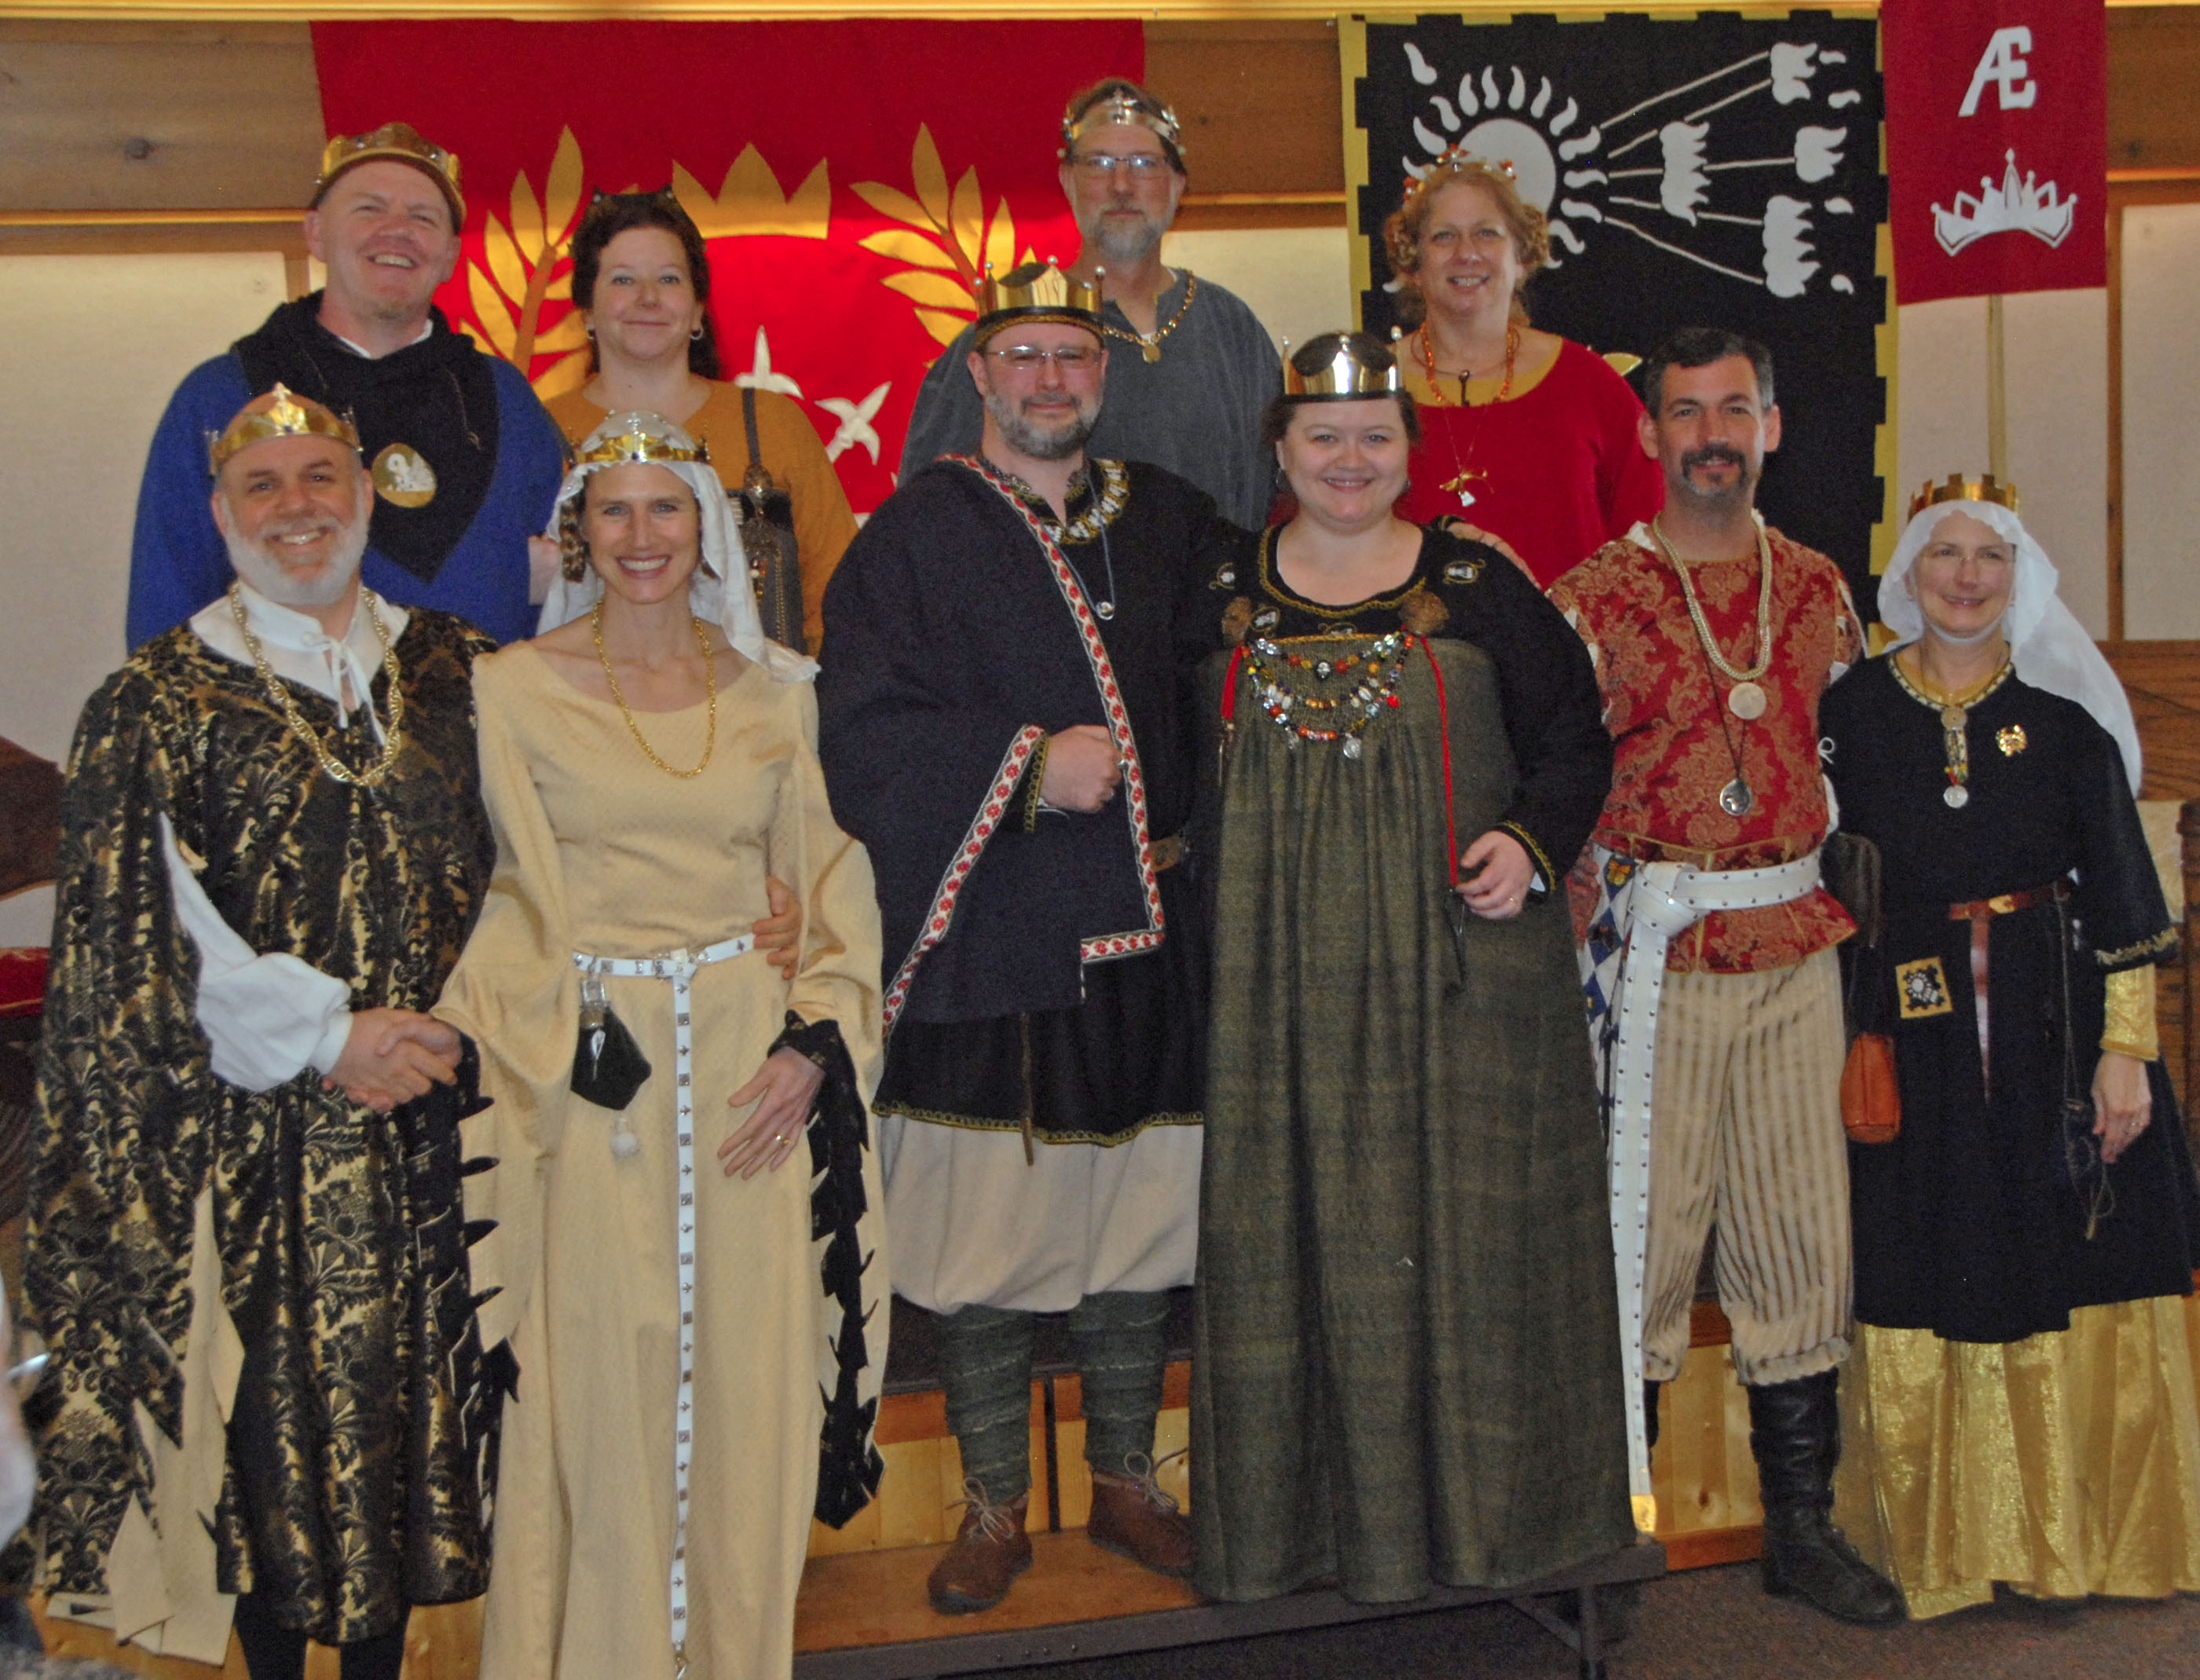 Former and Current Barons and Baronesses of the BMDL